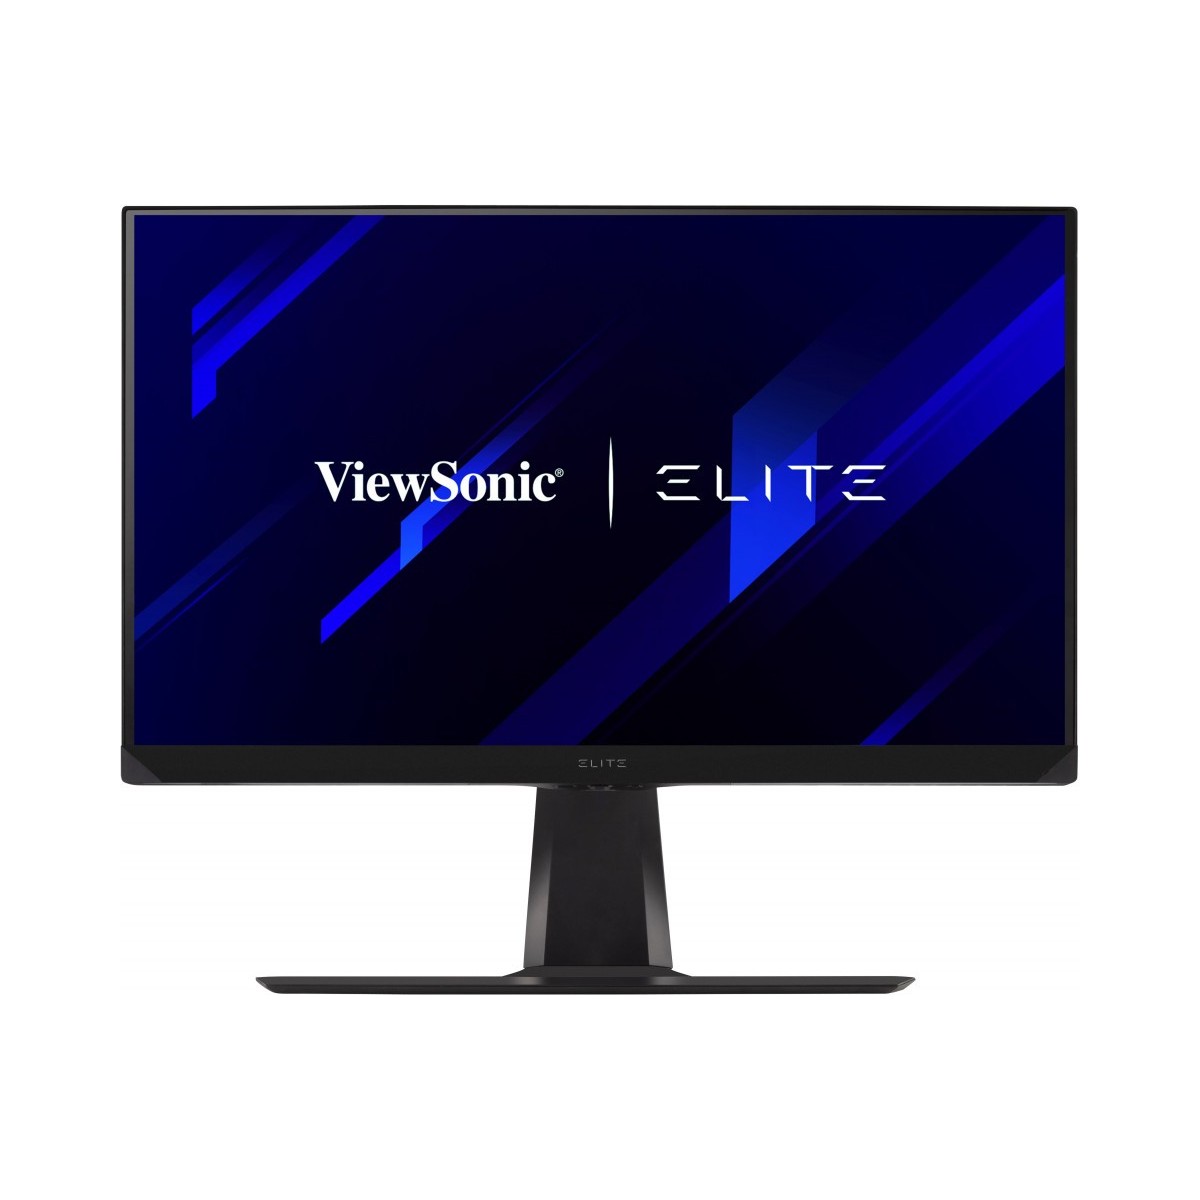 ViewSonic LED monitor - QHD - 27inch - 400 nits - resp 1ms - incl 2x3W speakers 240Hz NVIDIA - 27